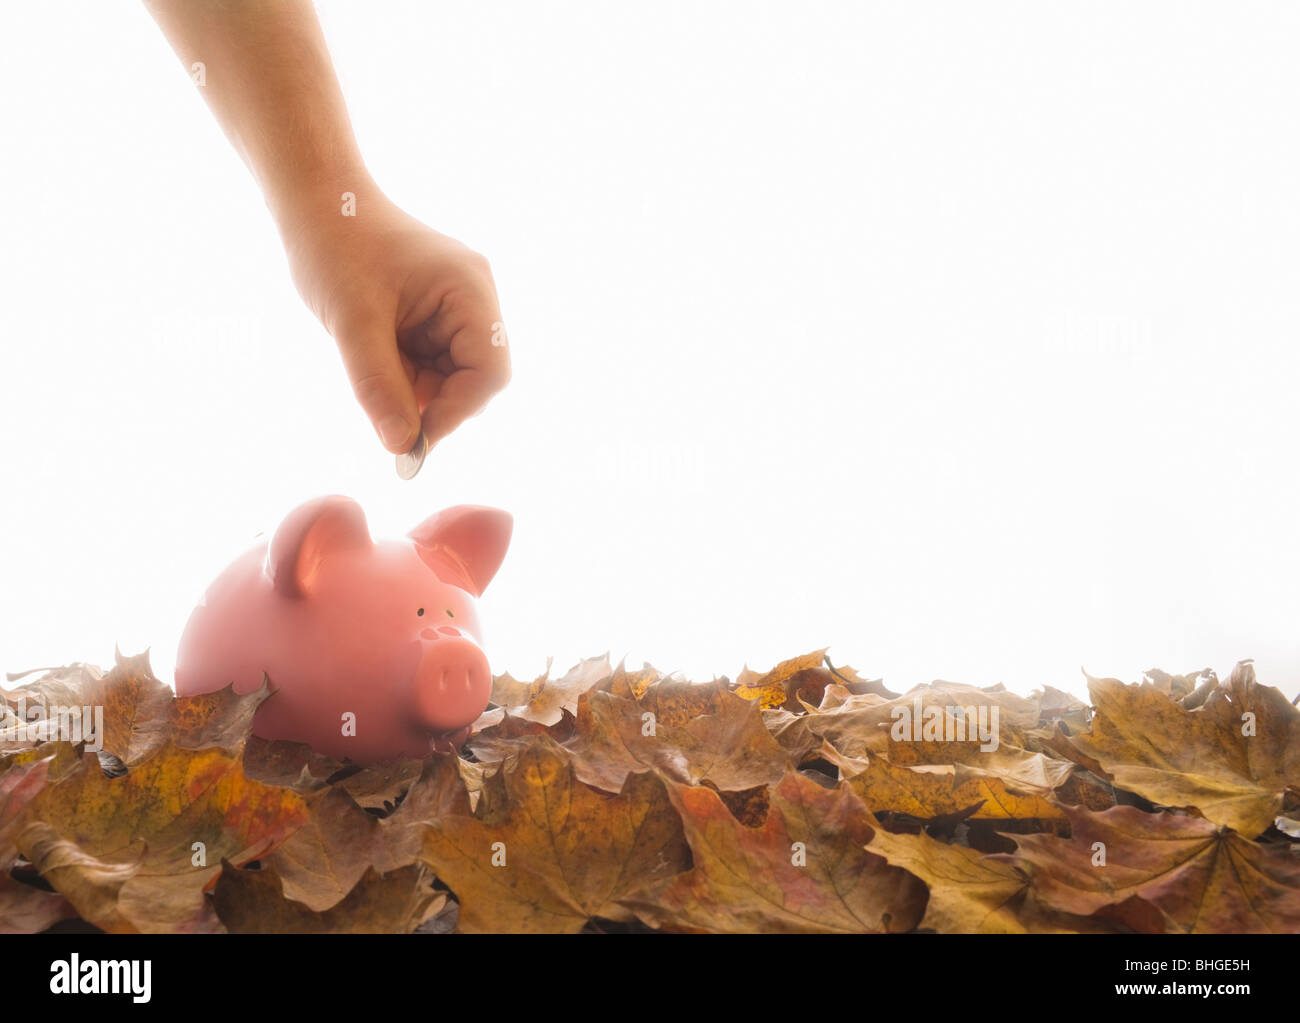 Piggy bank on leaves with hand Stock Photo